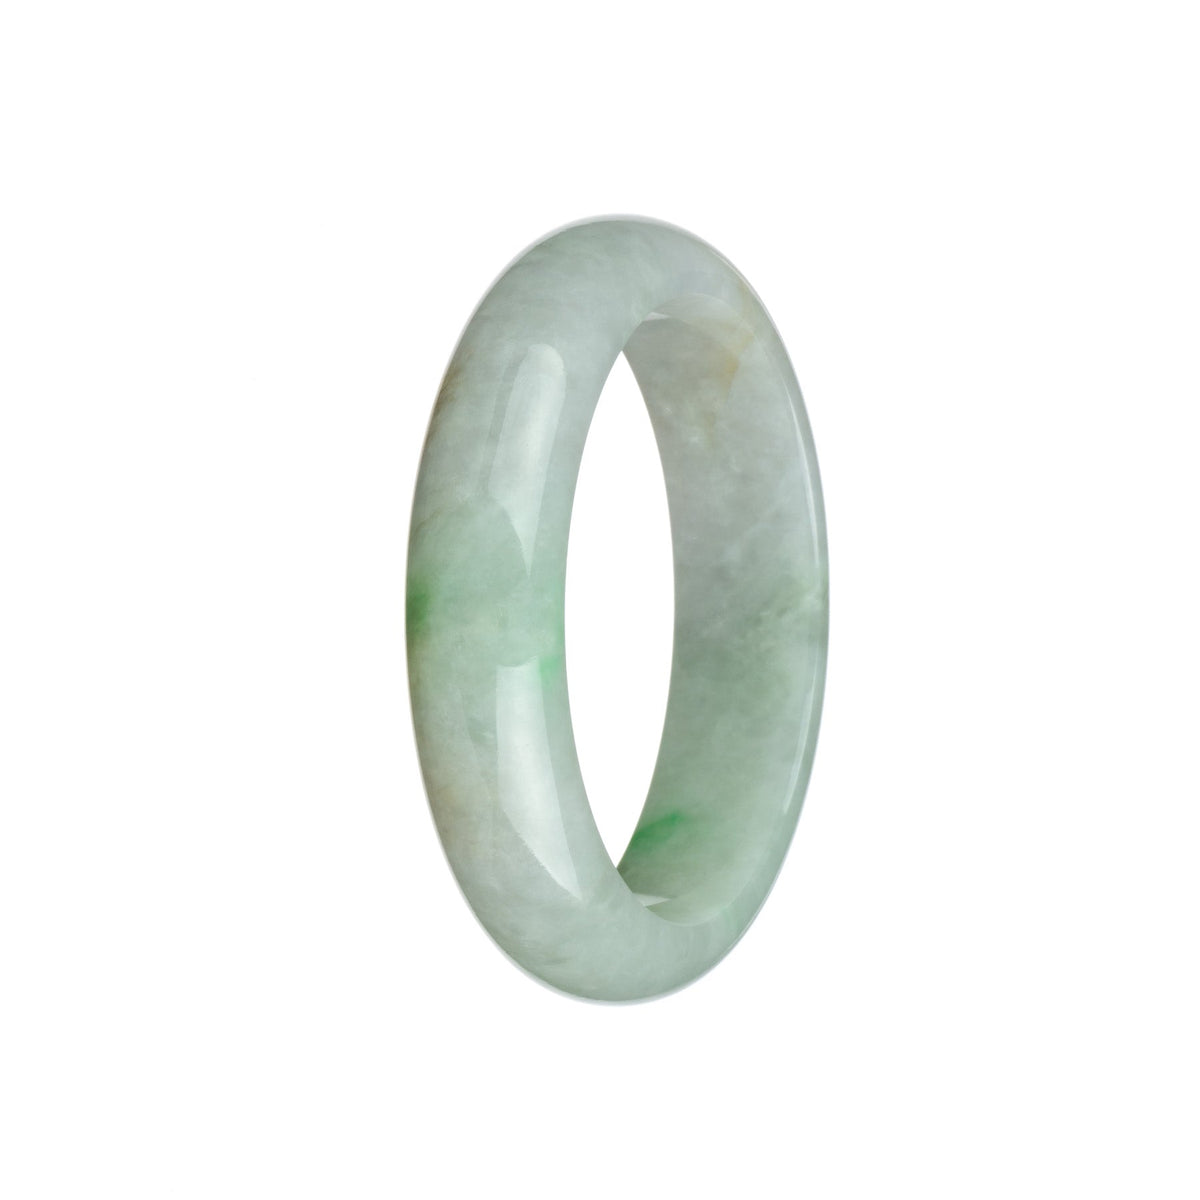 A close-up photo of an authentic Grade A white jadeite bangle with apple green hues. The bangle is in the shape of a half moon and measures 57mm in diameter. It is a beautiful piece of jewelry from MAYS GEMS.